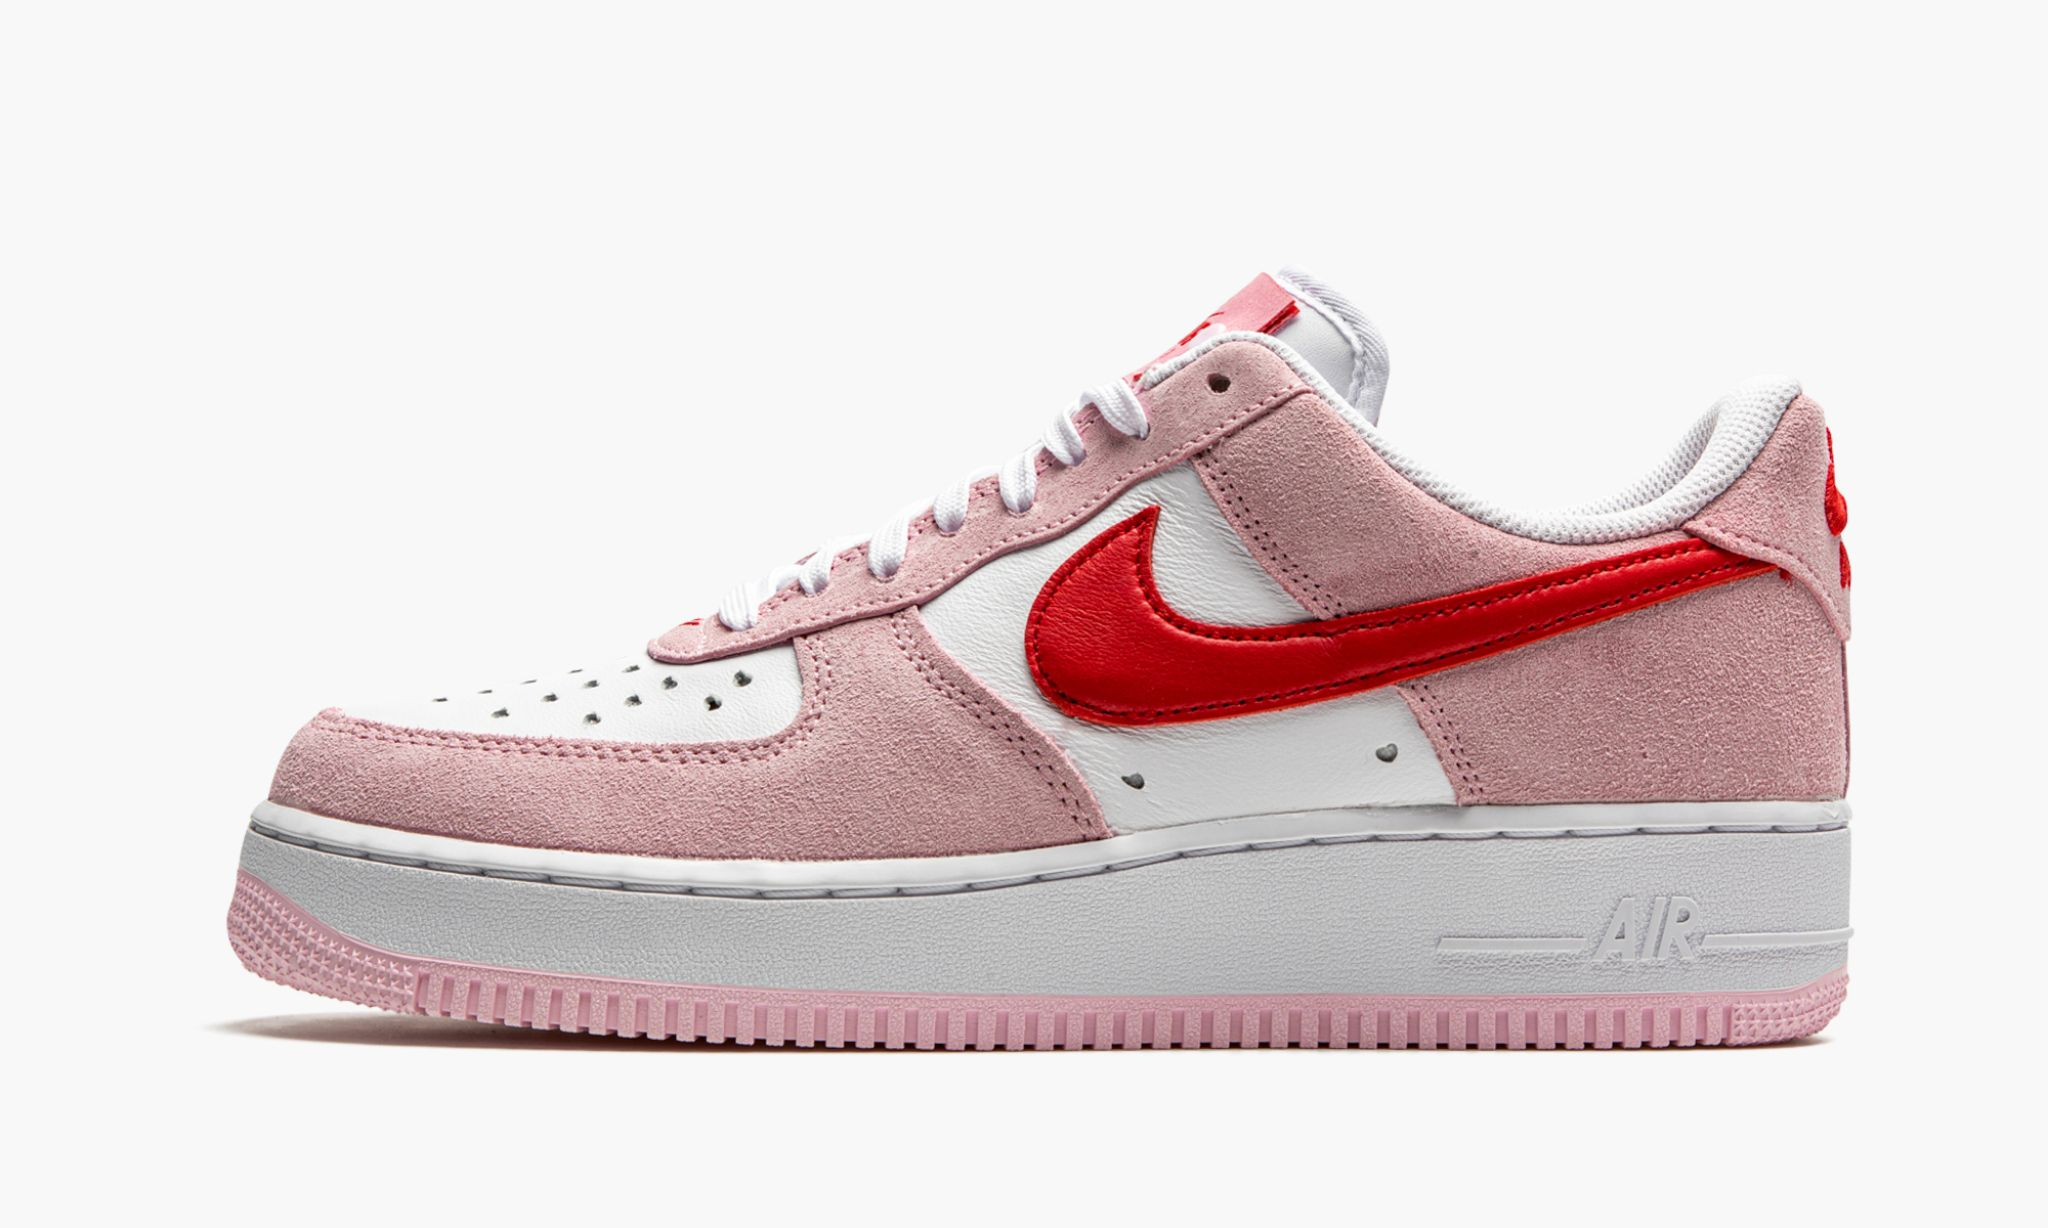 Nike Air Force Valentines Day 2021. Nike Air Force 1 07. Nike Air Force 1 Low Valentines Day. Nike Air Force 1 Low.